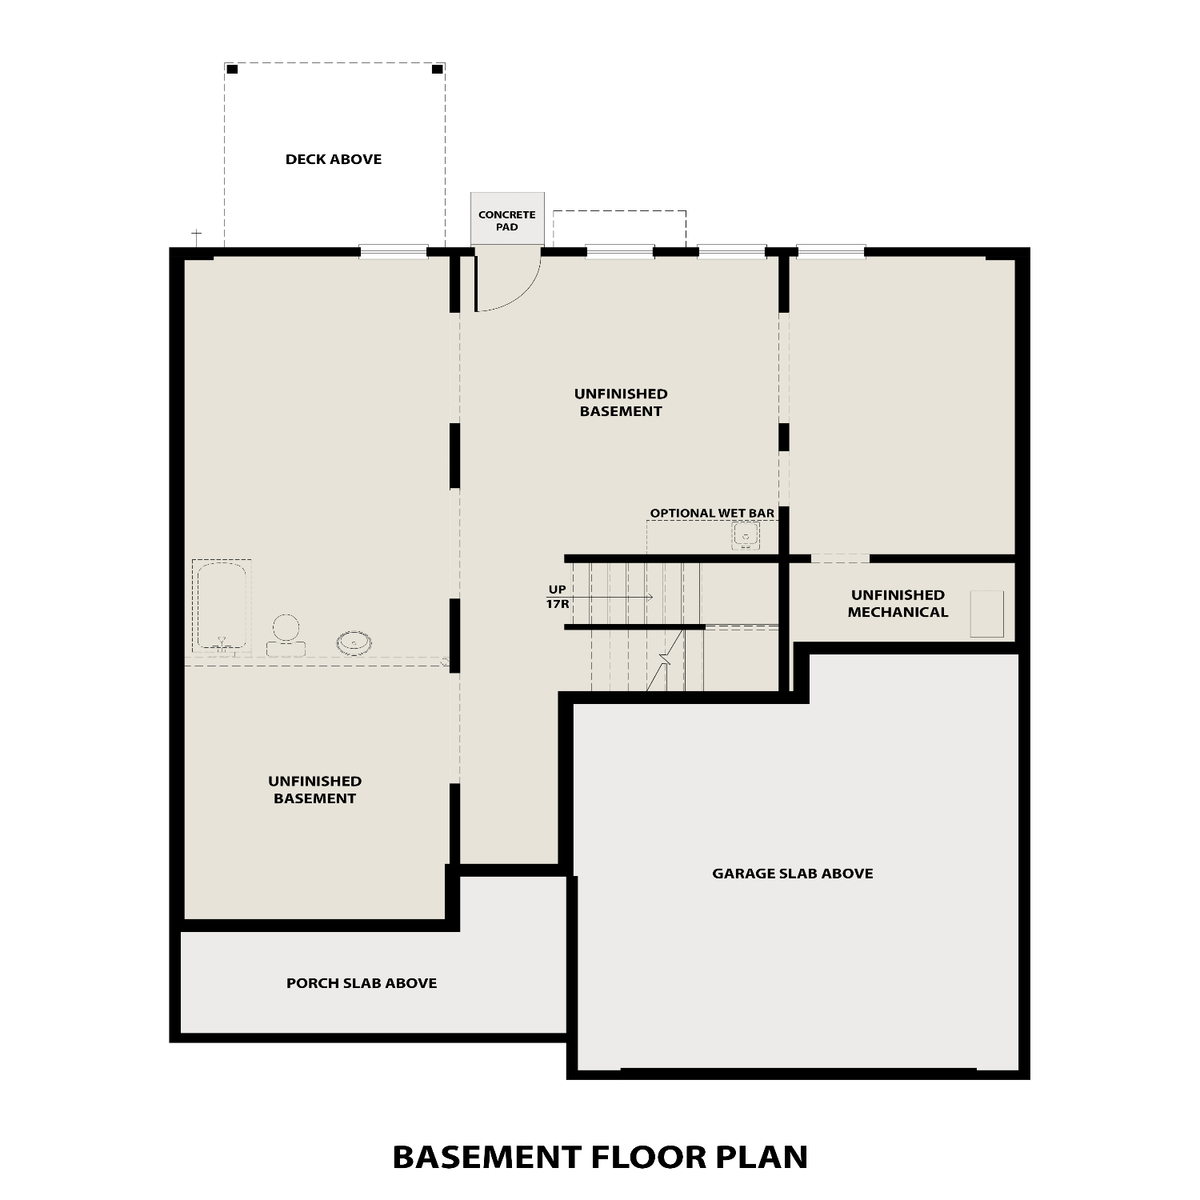 3 - The Willow D - Unfinished Basement  floor plan layout for 22 Roxberry Glen in Davidson Homes' Riverwood community.